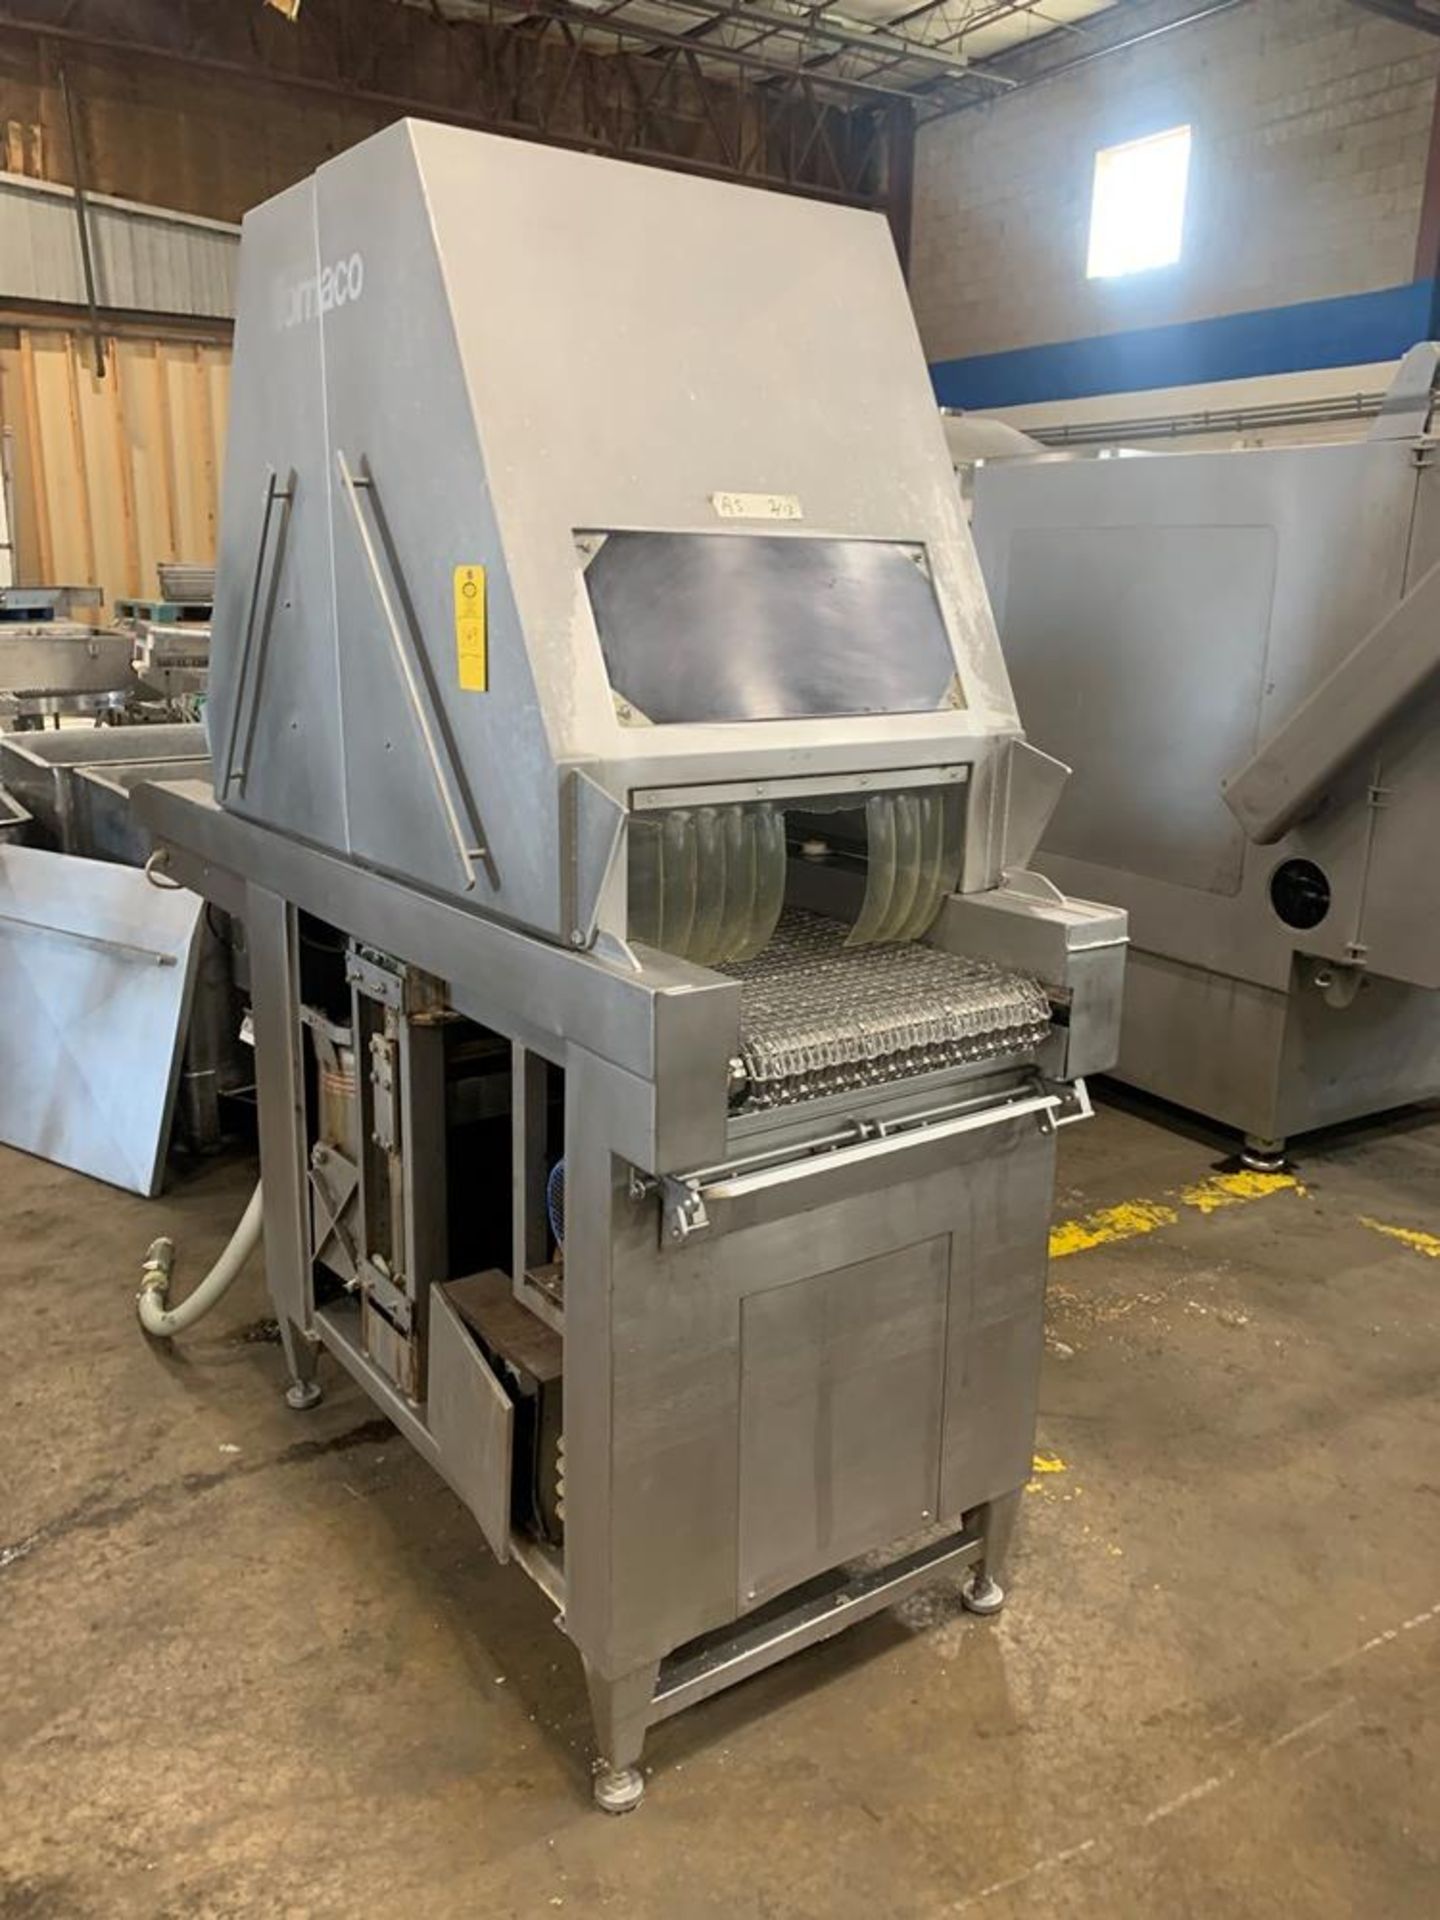 Fomaco Mdl. FGM 44/88 Injector, Ser. #49001990 (Located in Plano, IL)